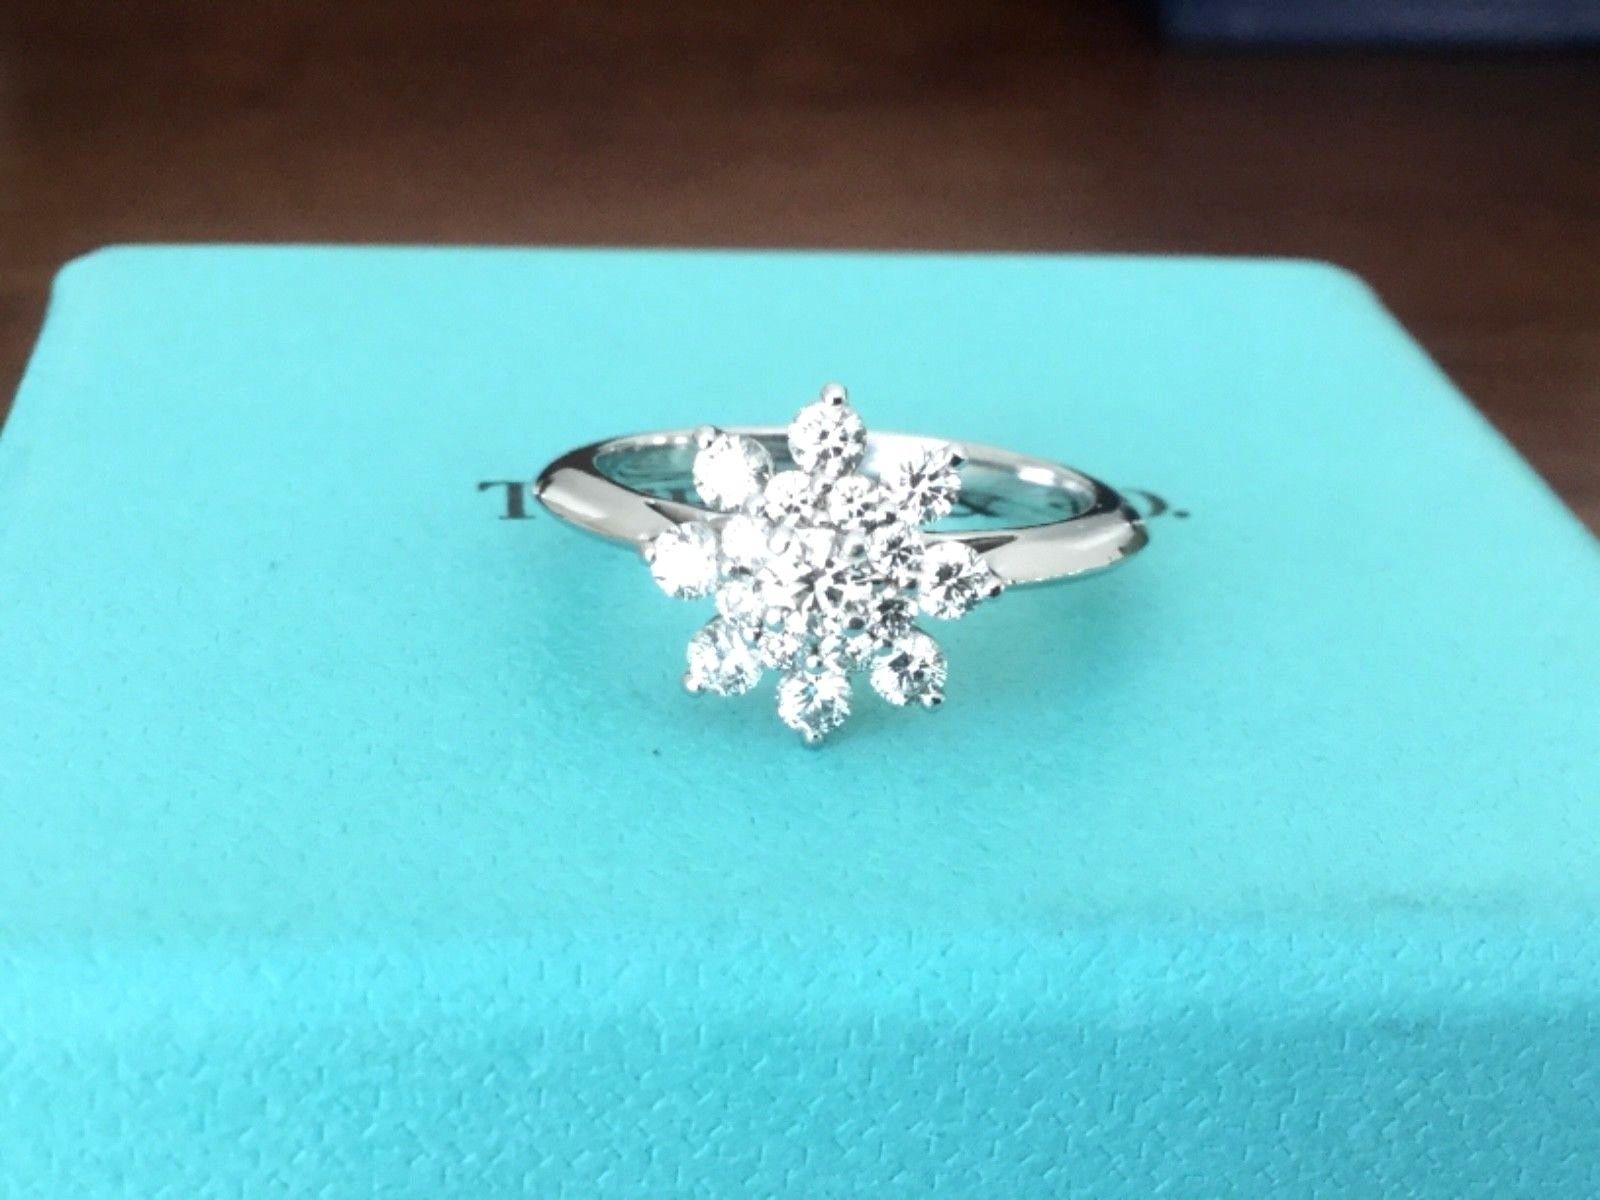 For your consideration is a Tiffany & Co Platinum and Diamond .60 carat Flower Ring.  This ring makes the perfect cocktail ring or engagement ring.  This Tiffany & Co ring sold for $4,900 plus $346 in tax for a total of $5,246 in 2014. This Ring is